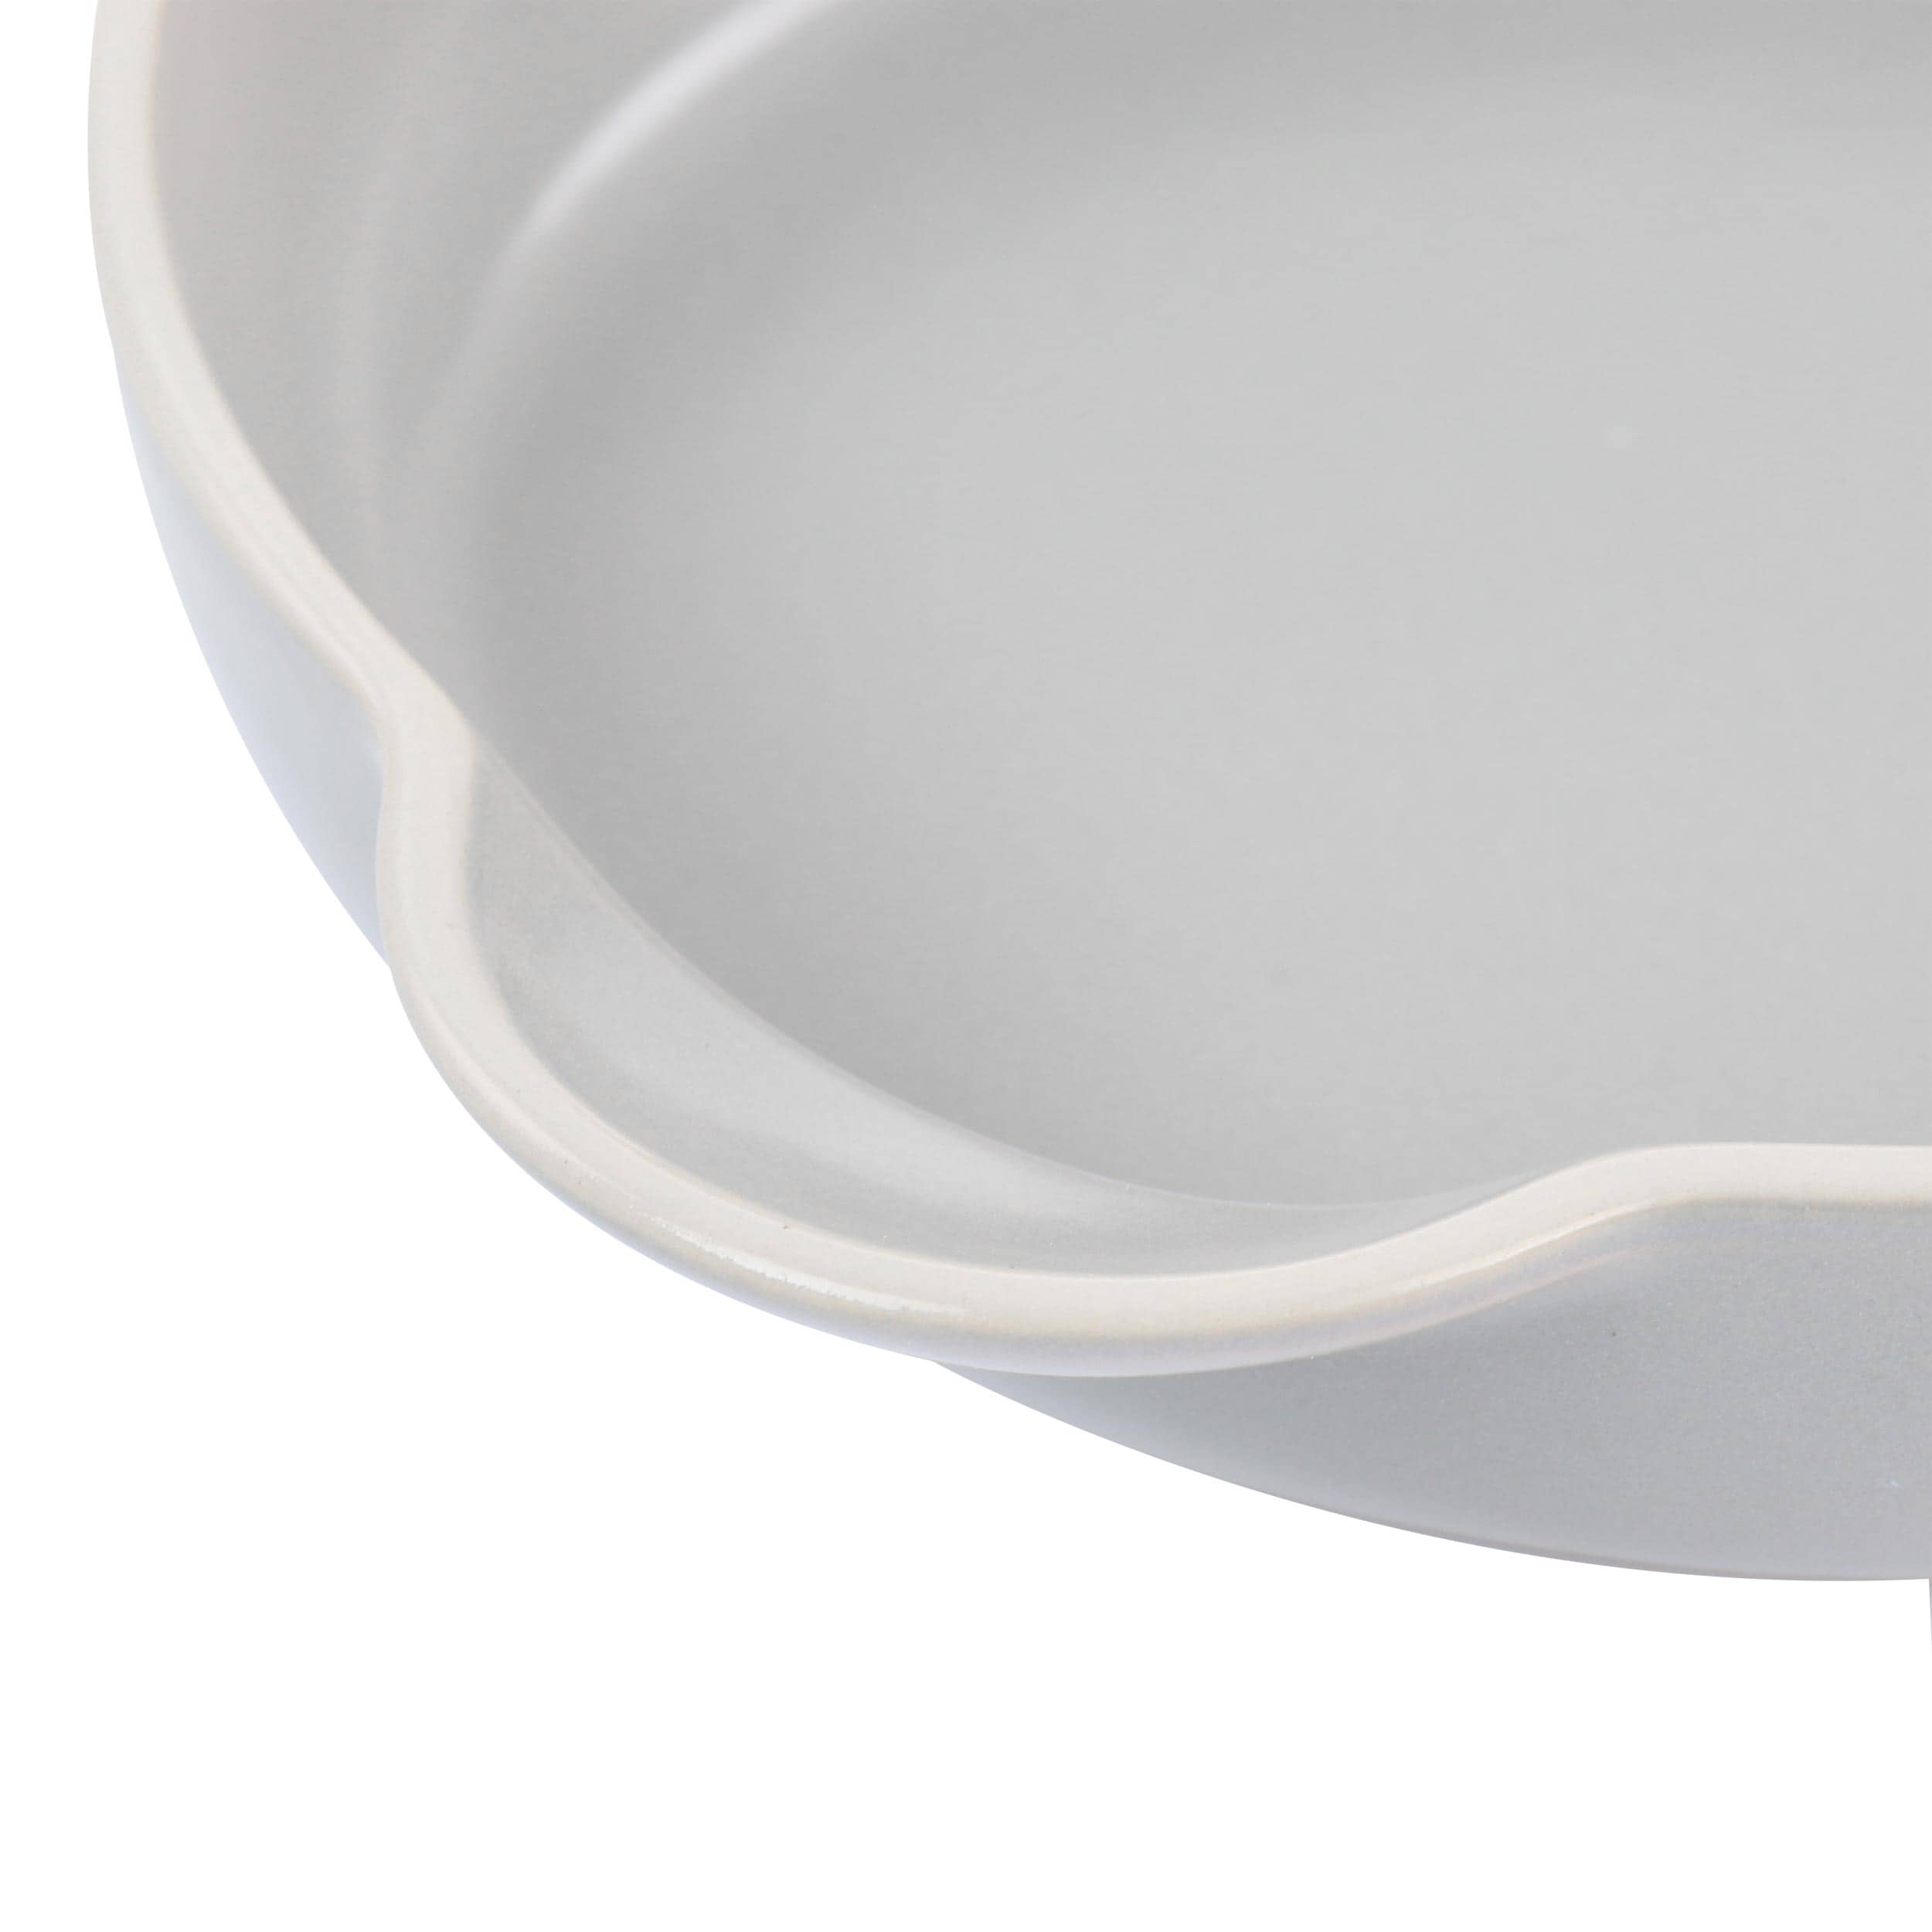 https://ak1.ostkcdn.com/images/products/is/images/direct/3b3fb1e157fdf587be50d49333bf13e2ca3e985c/Gibson-Home-Rockaway-2-Piece-Nesting-Bakeware-Bowl-Set.jpg